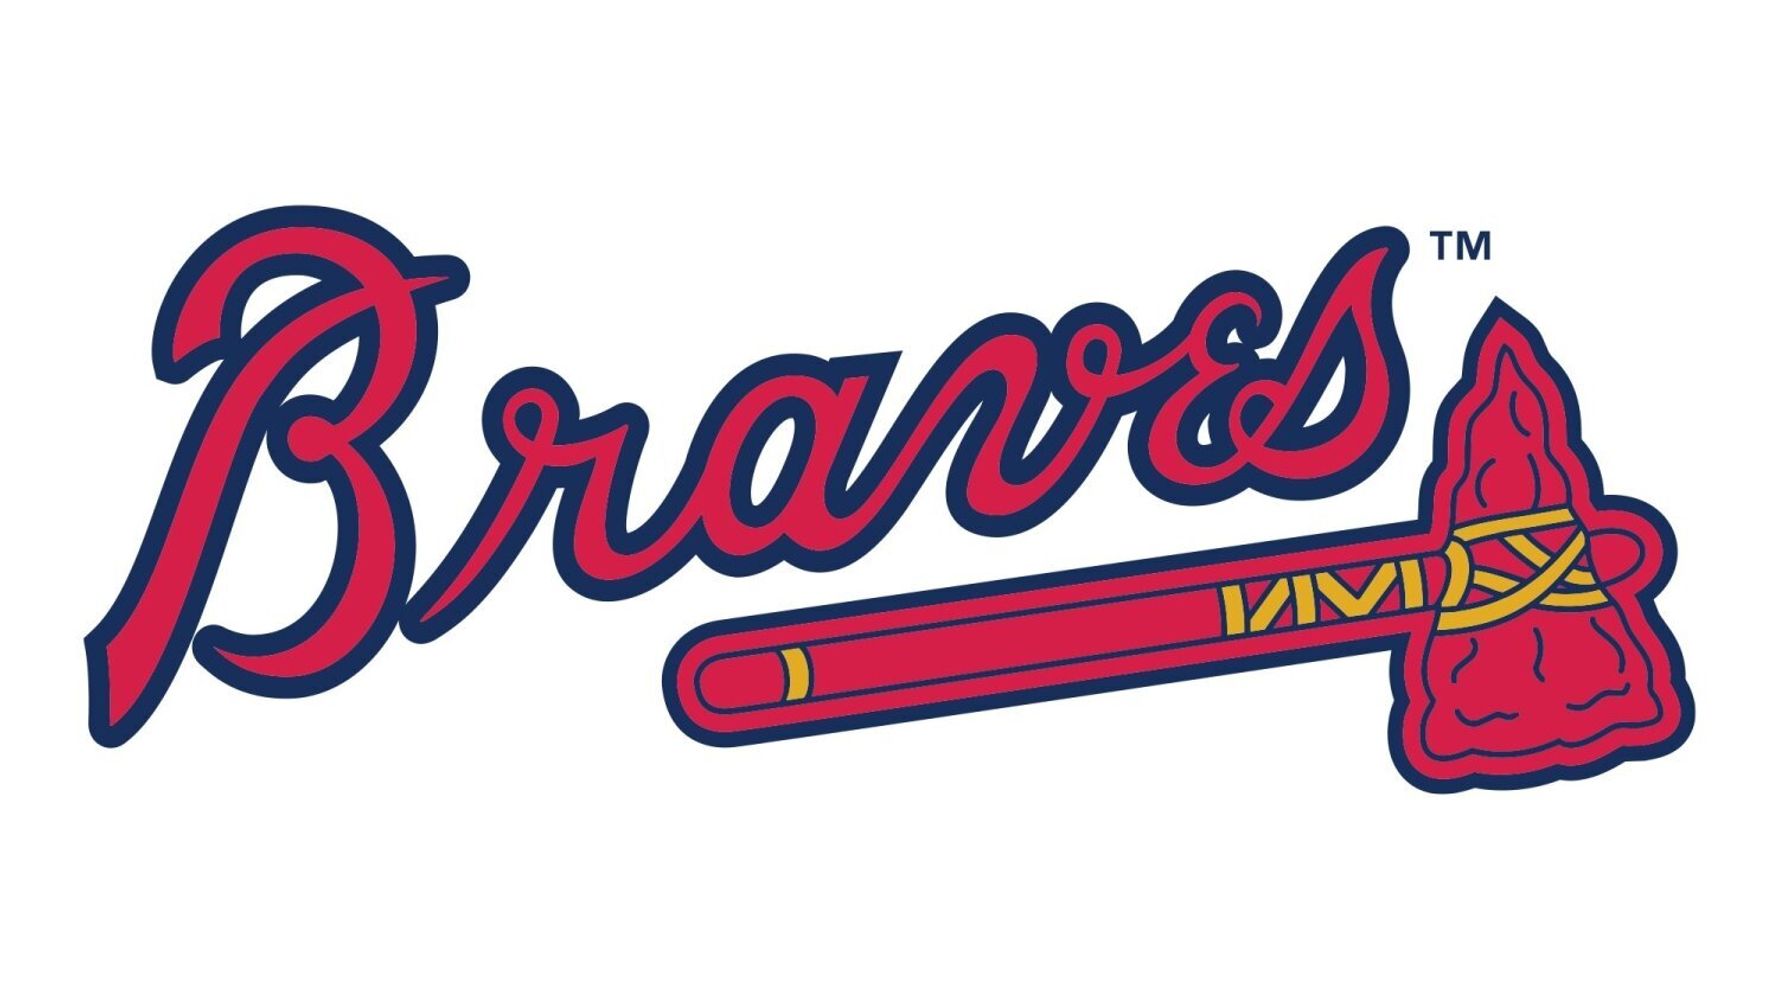 Atlanta Braves Will Reportedly Keep Name, Re-Evaluate Tomahawk